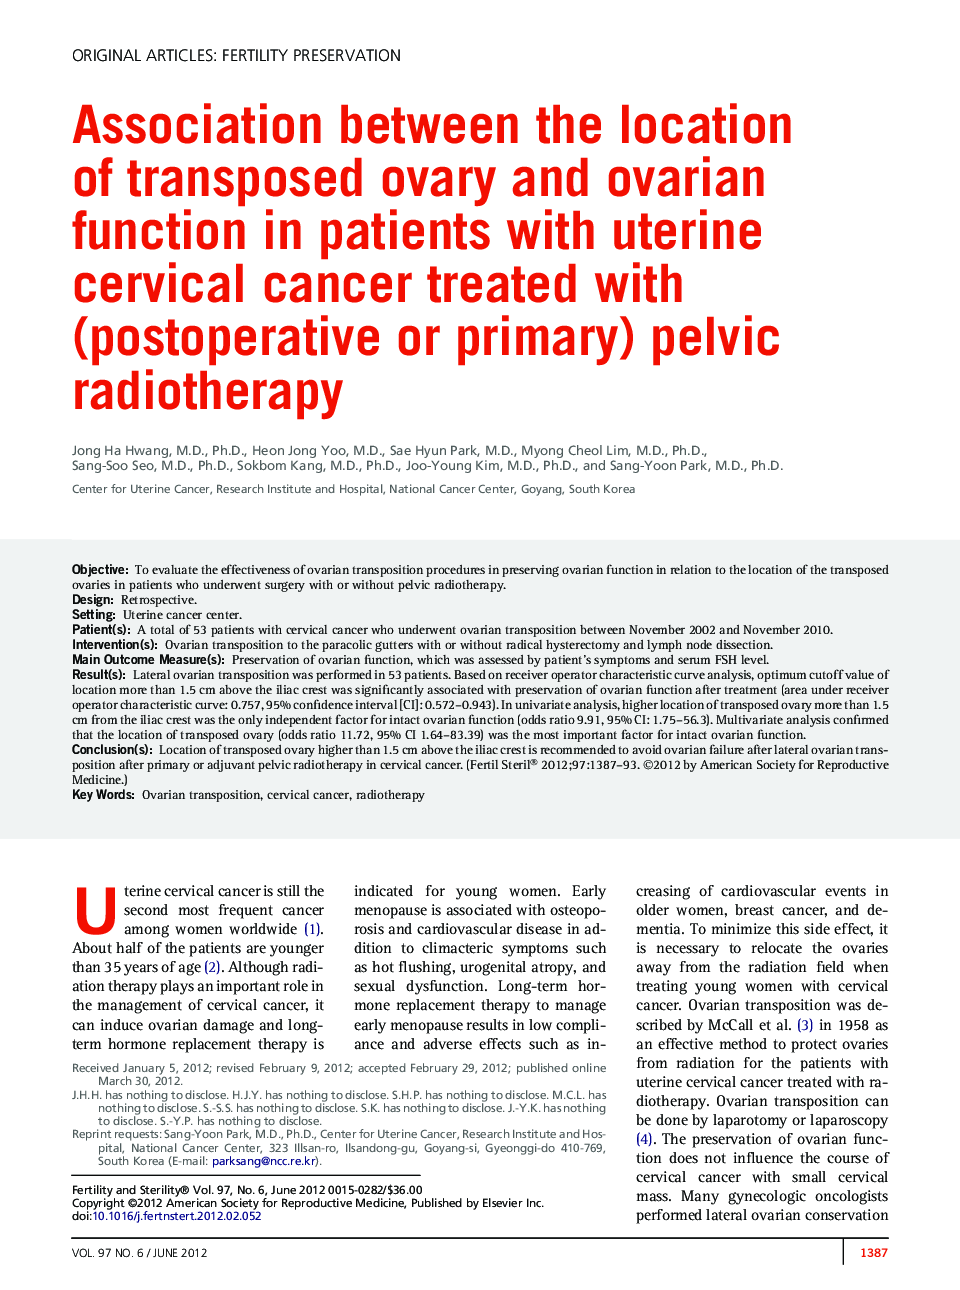 Association between the location ofÂ transposed ovary and ovarian function in patients with uterine cervical cancer treated with (postoperative or primary) pelvic radiotherapy